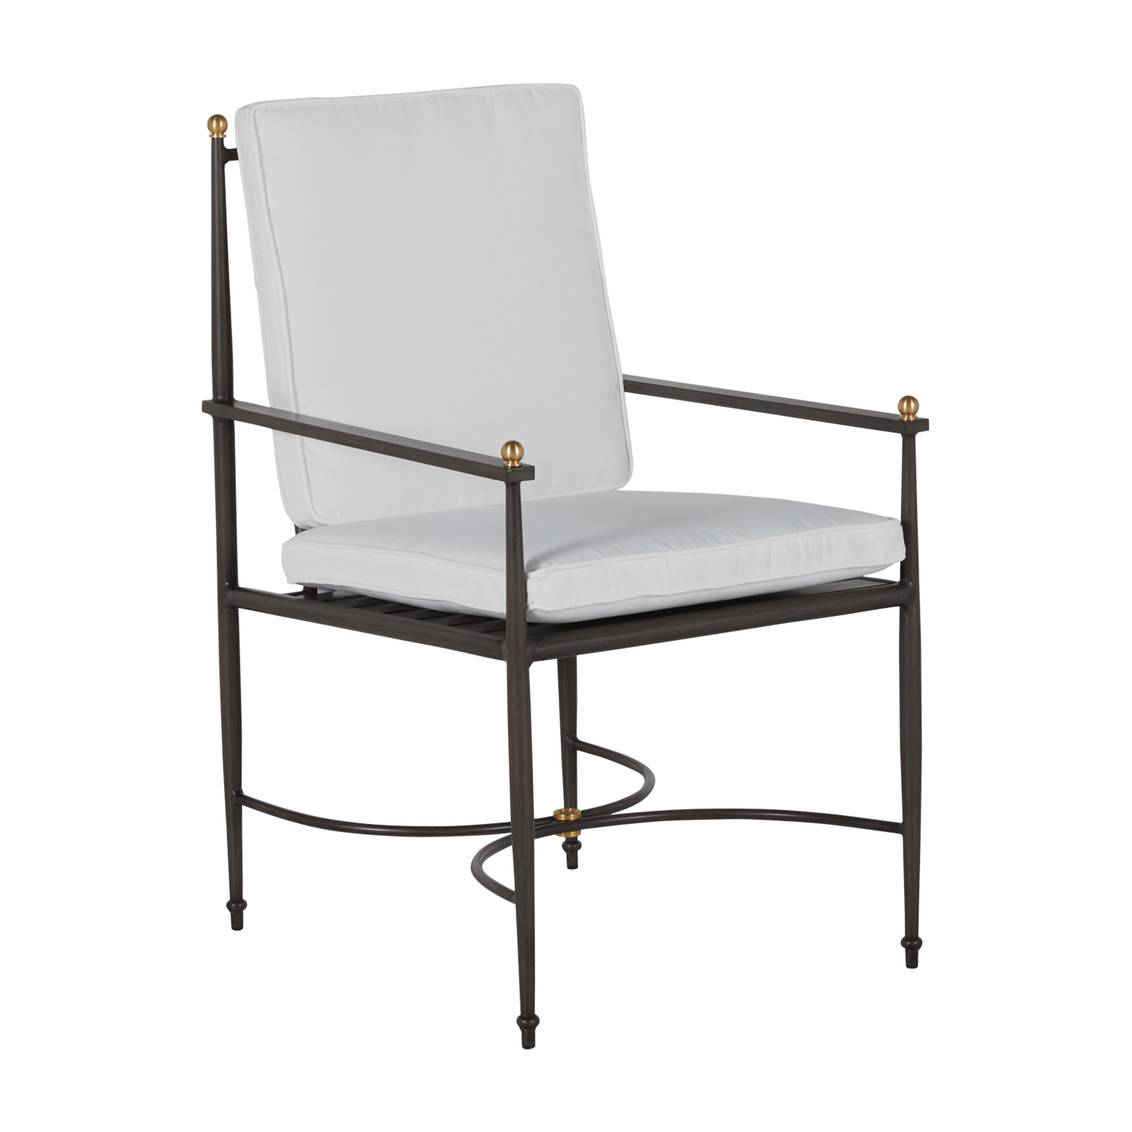 roma arm chair in slate grey – frame only product image